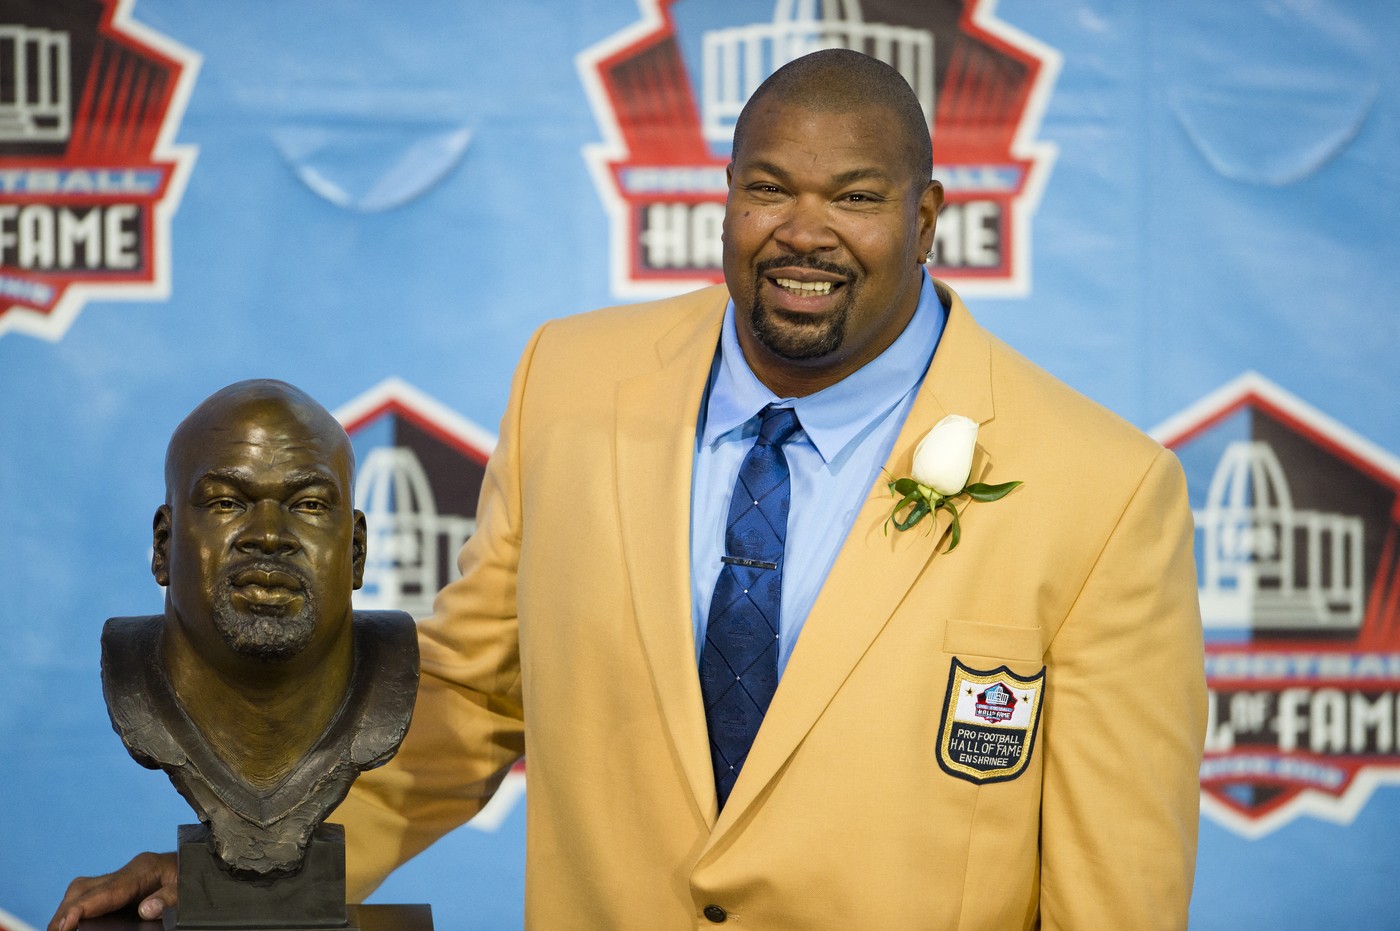 CANTON, OH - AUGUST 3: Former offensive lineman Larry Allen of the Dallas Cowboys poses with his Hall of Fame bust during the NFL Class of 2013 Enshrinement Ceremony at Fawcett Stadium on Aug. 3, 2013 in Canton, Ohio.,Image: 167742950, License: Rights-managed, Restrictions: , Model Release: no